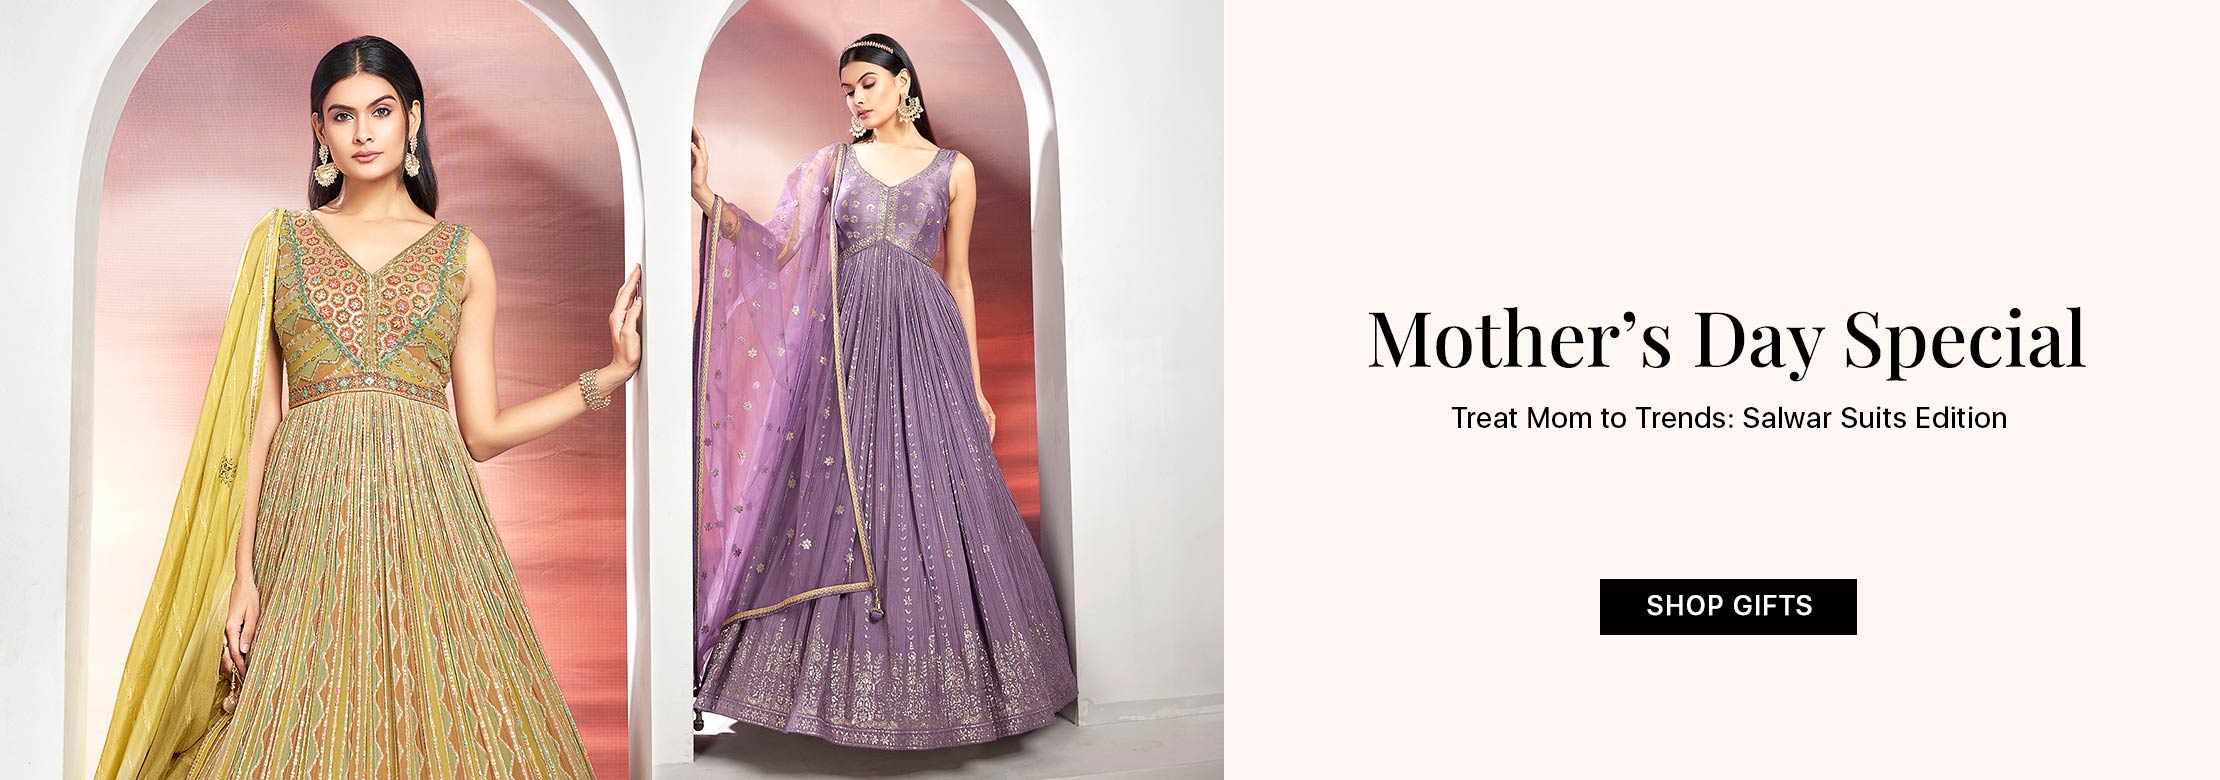 Mother's Day Special Salwar Suits